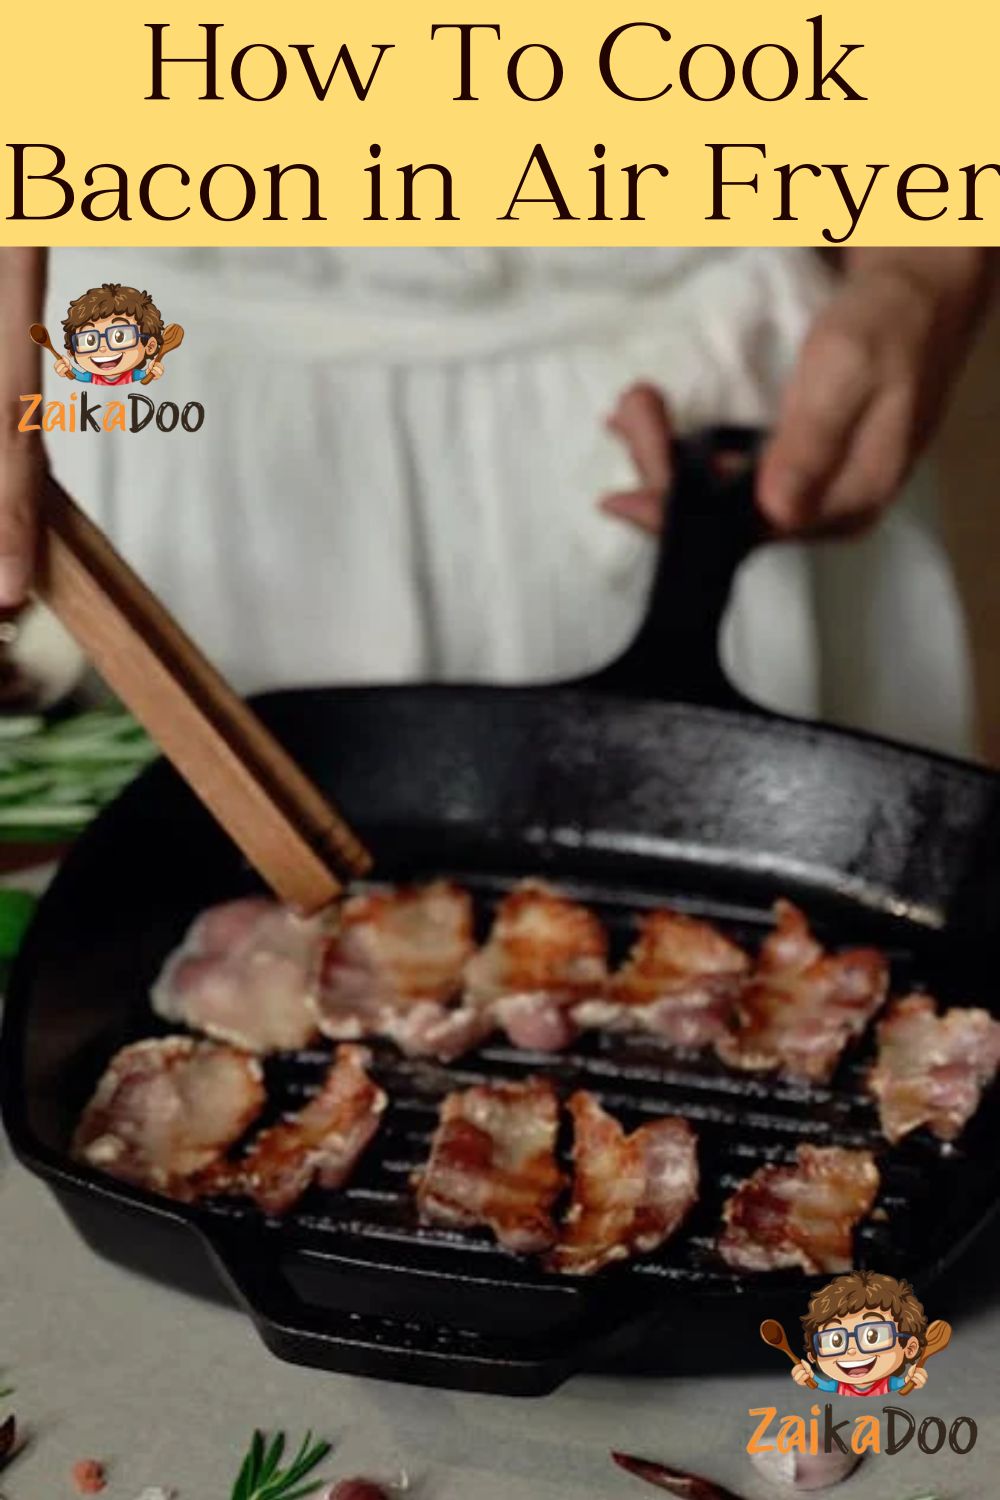 How To Cook Bacon in Air Fryer